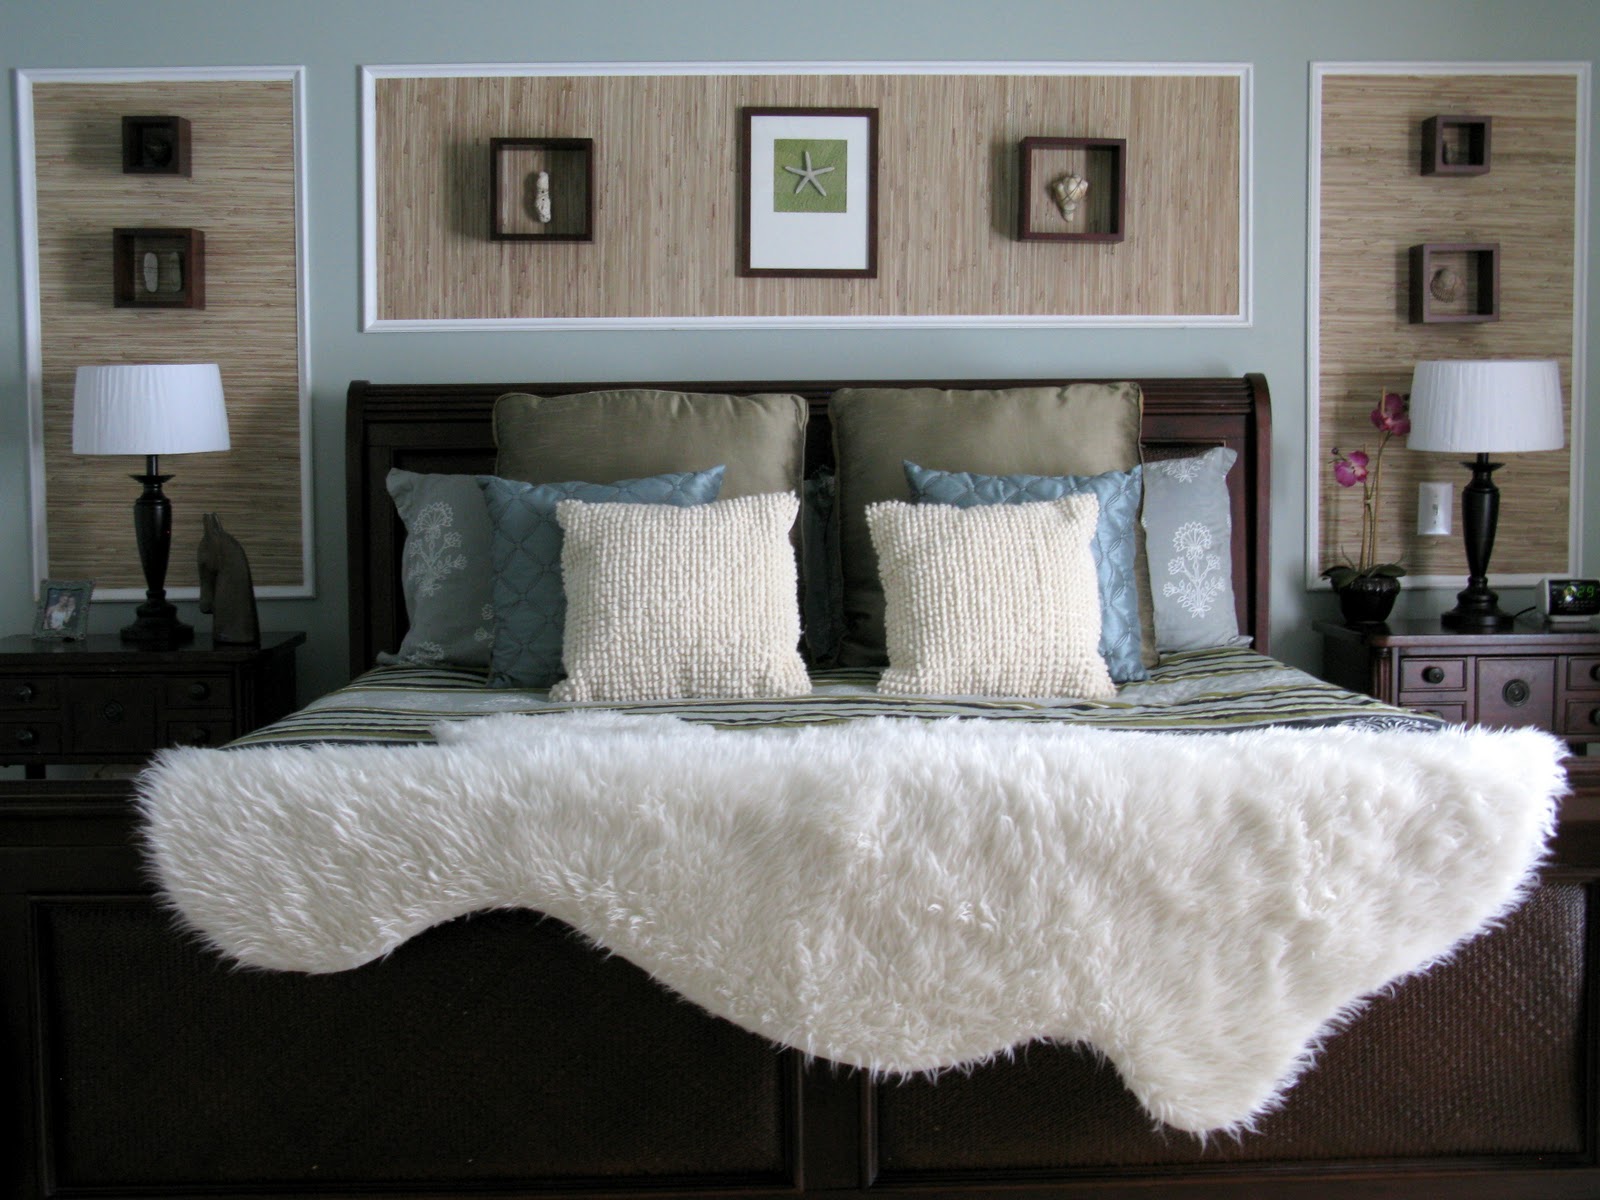 accent colors example from Houzz